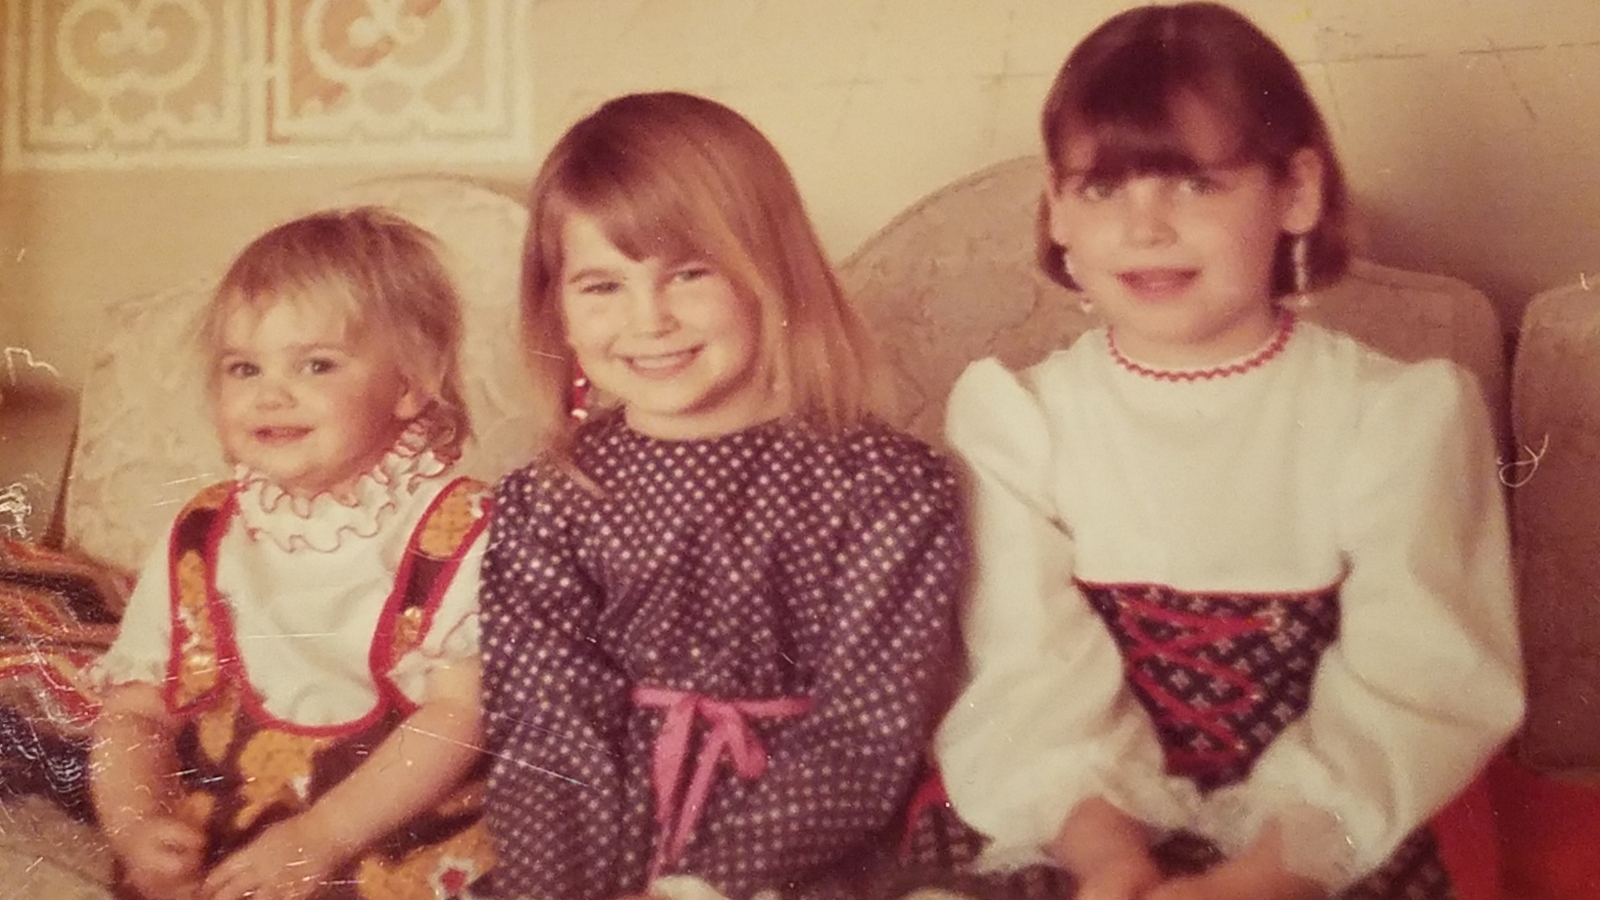 Kerry, Missy and Julie... 1973 ish